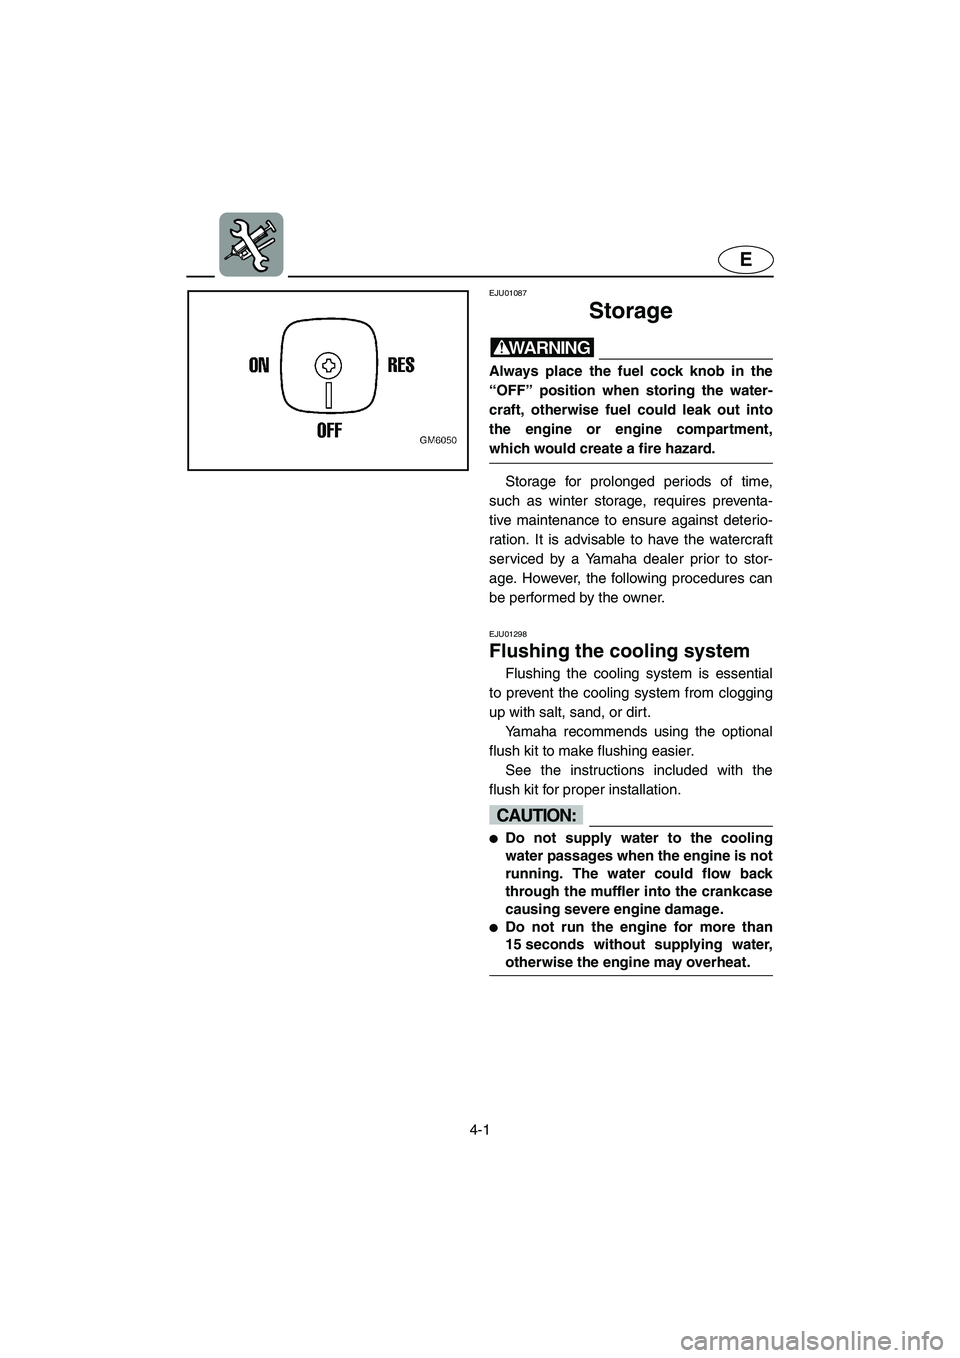 YAMAHA SUPERJET 2002  Owners Manual 4-1
E
EJU01087 
Storage  
WARNING@ Always place the fuel cock knob in the
“OFF” position when storing the water-
craft, otherwise fuel could leak out into
the engine or engine compartment,
which w